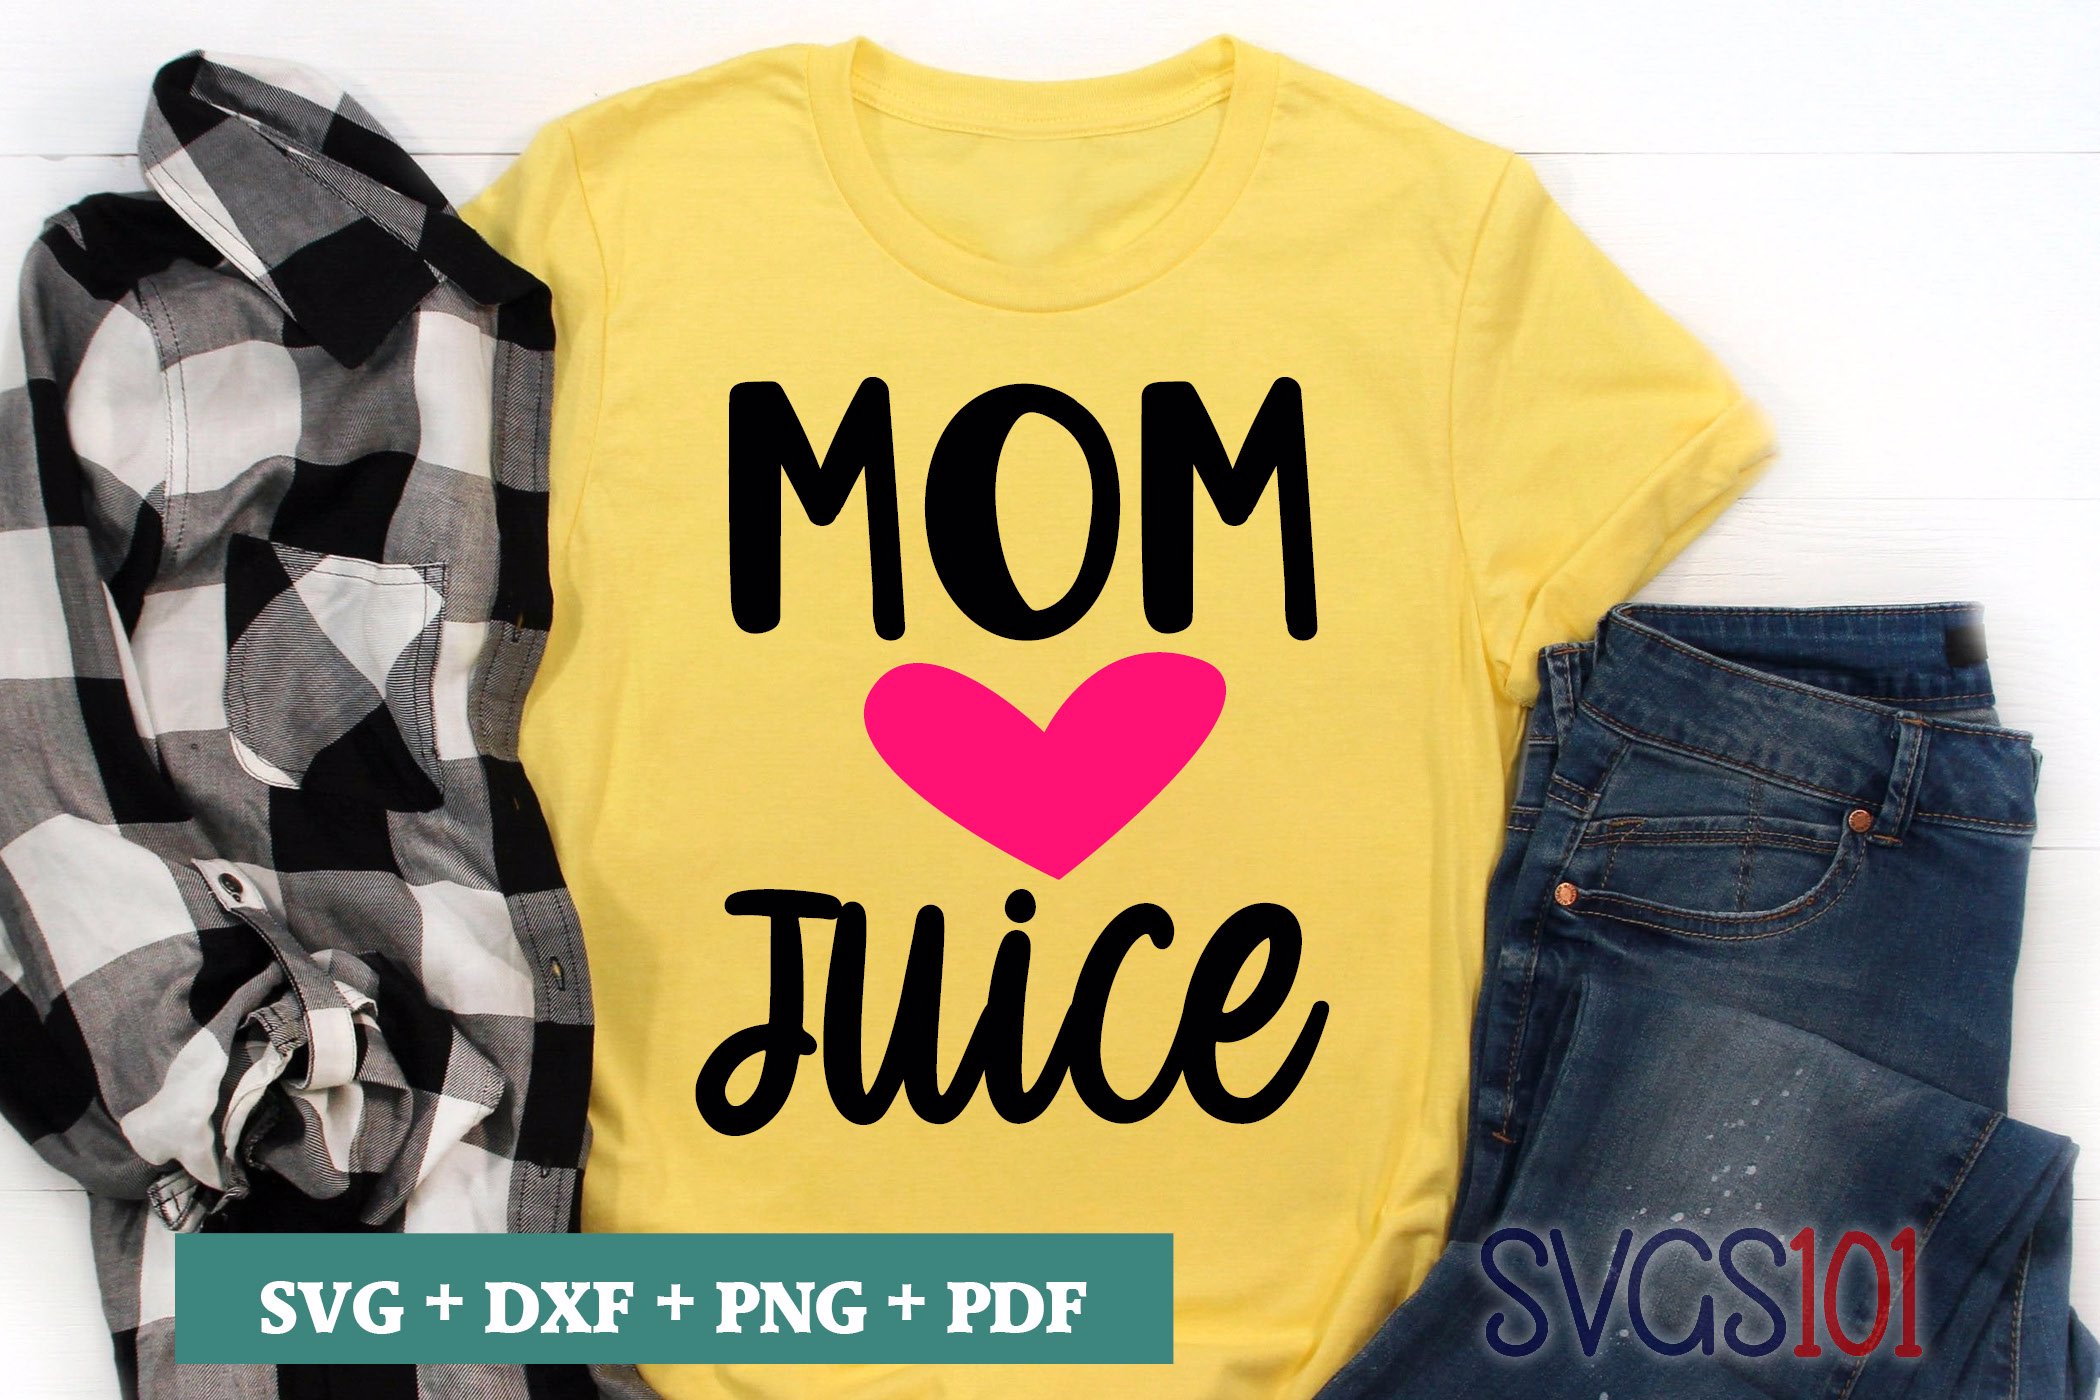 Download Mom Juice SVG Cuttable file - DXF, EPS, PNG, PDF | SVG Cutting File